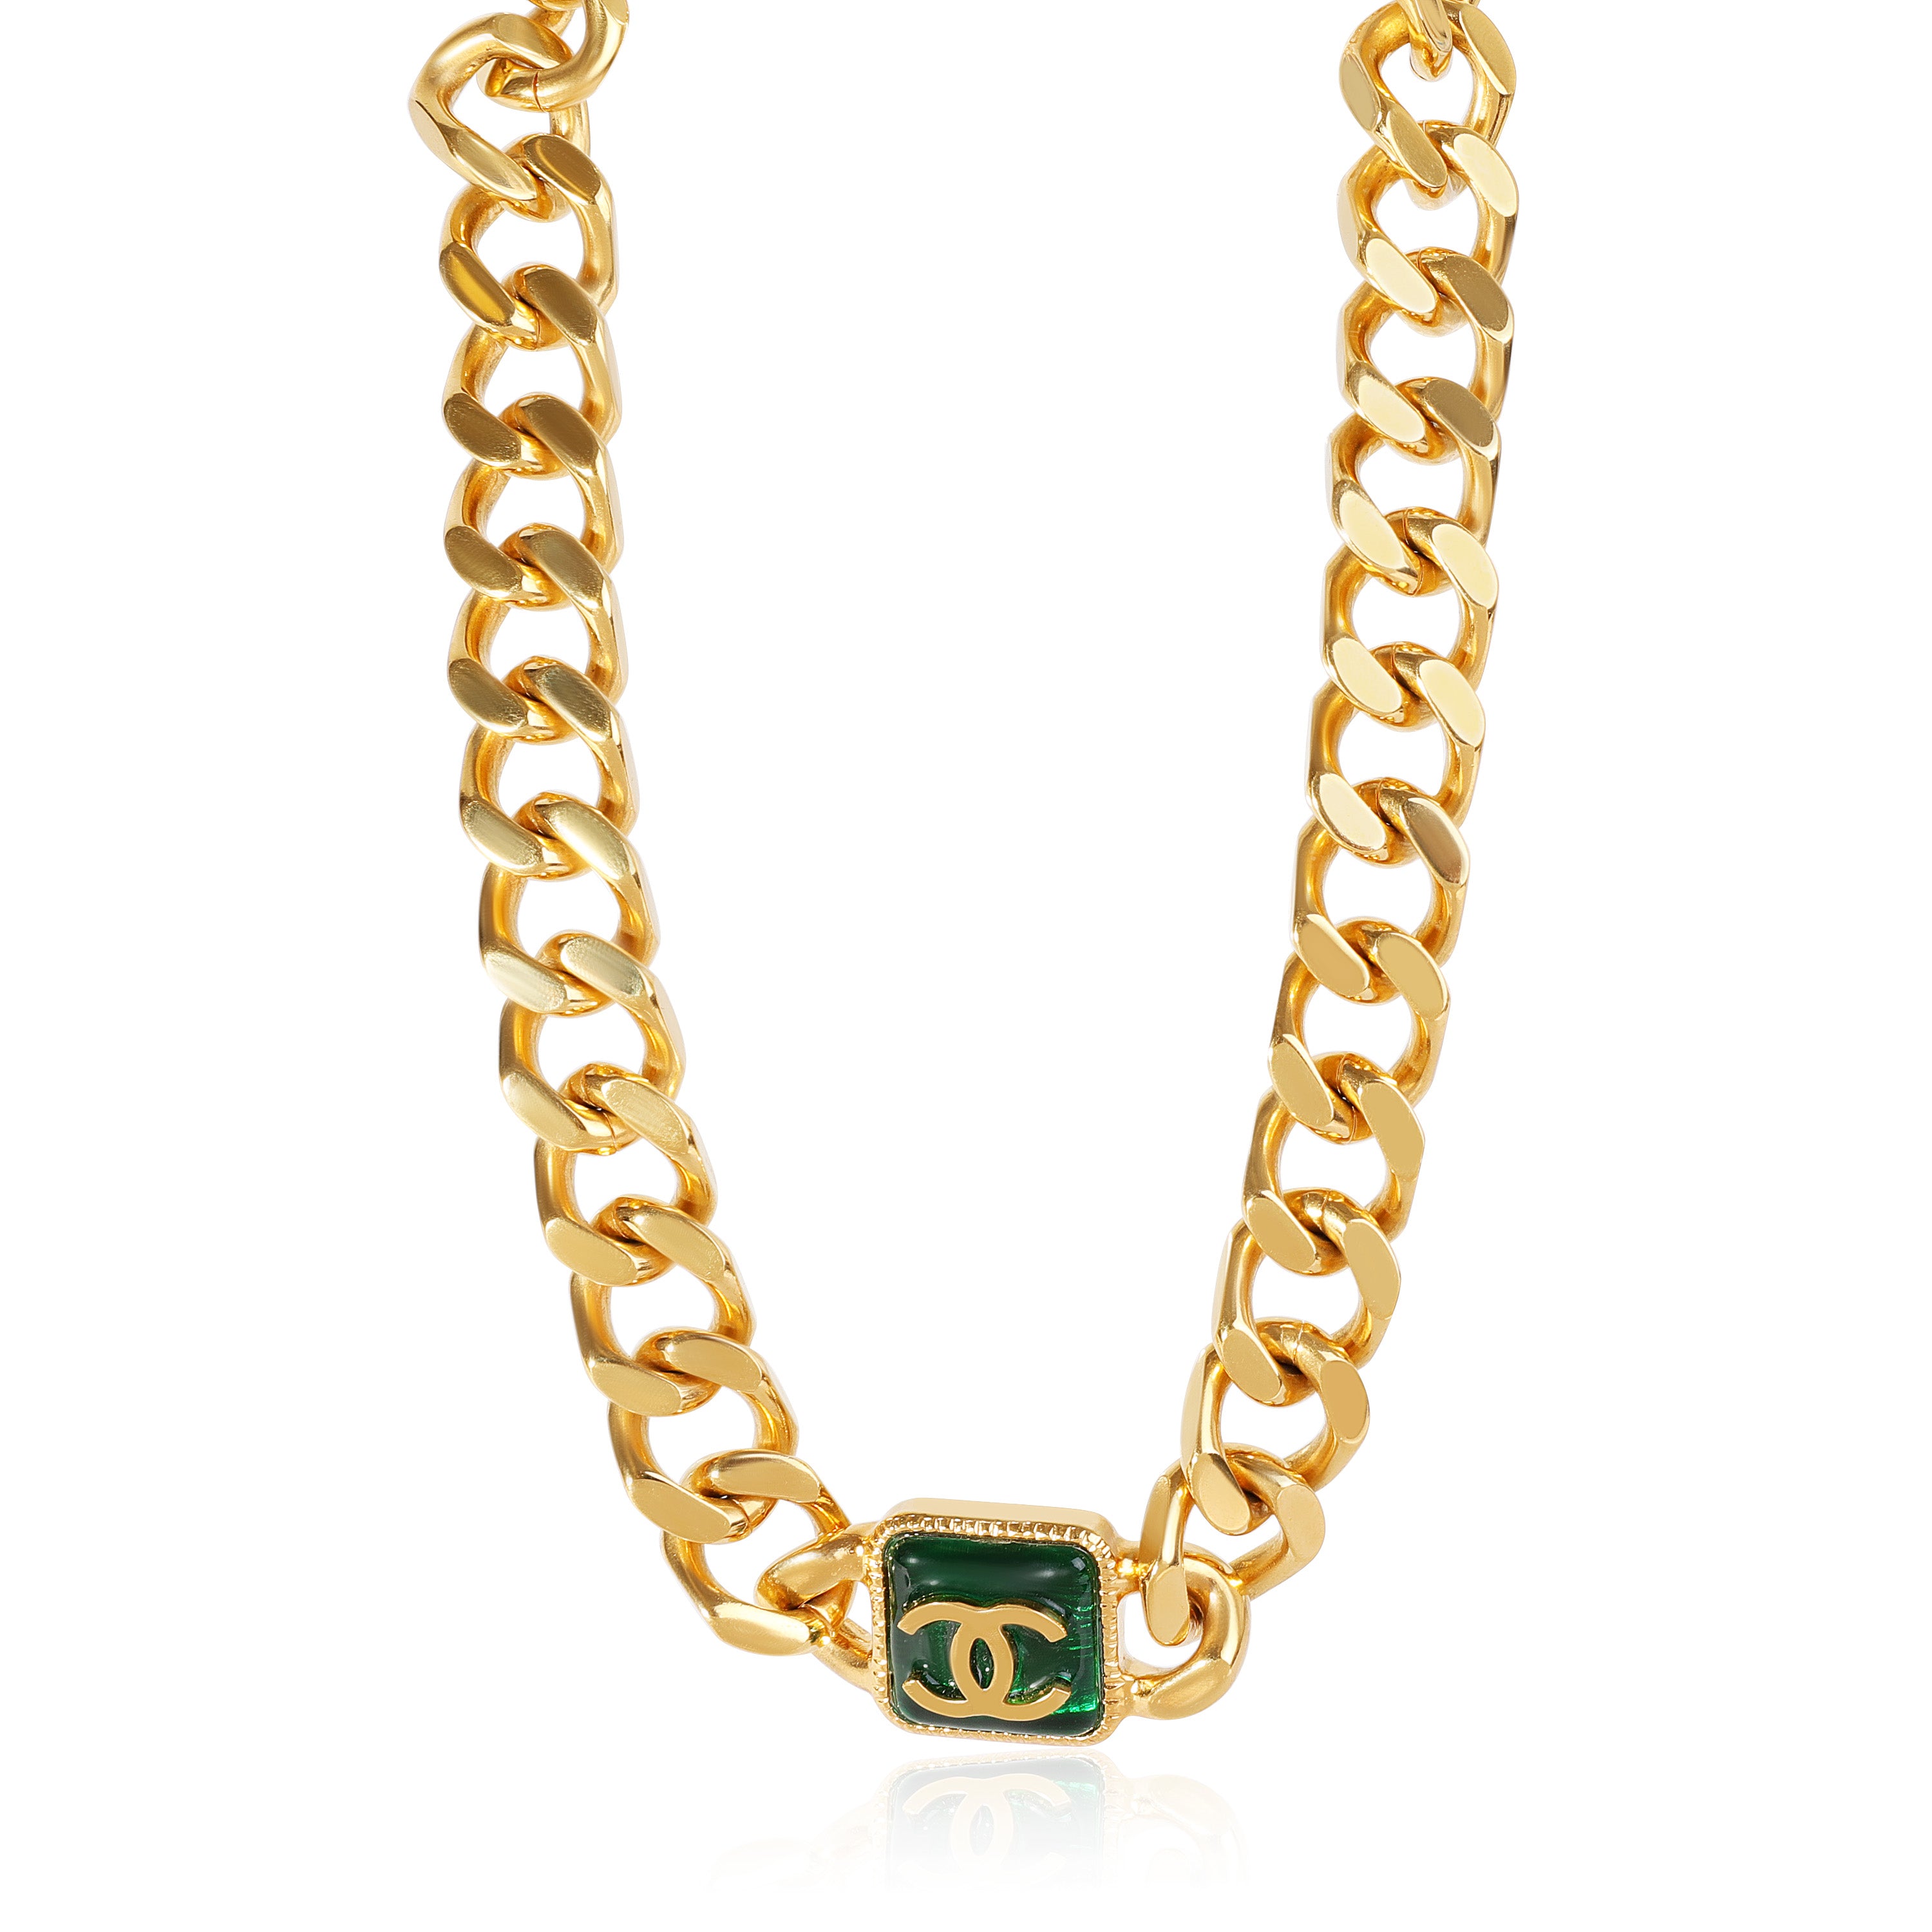 Chanel 2020 Resin CC Curb Link Choker Gold Tone Necklace